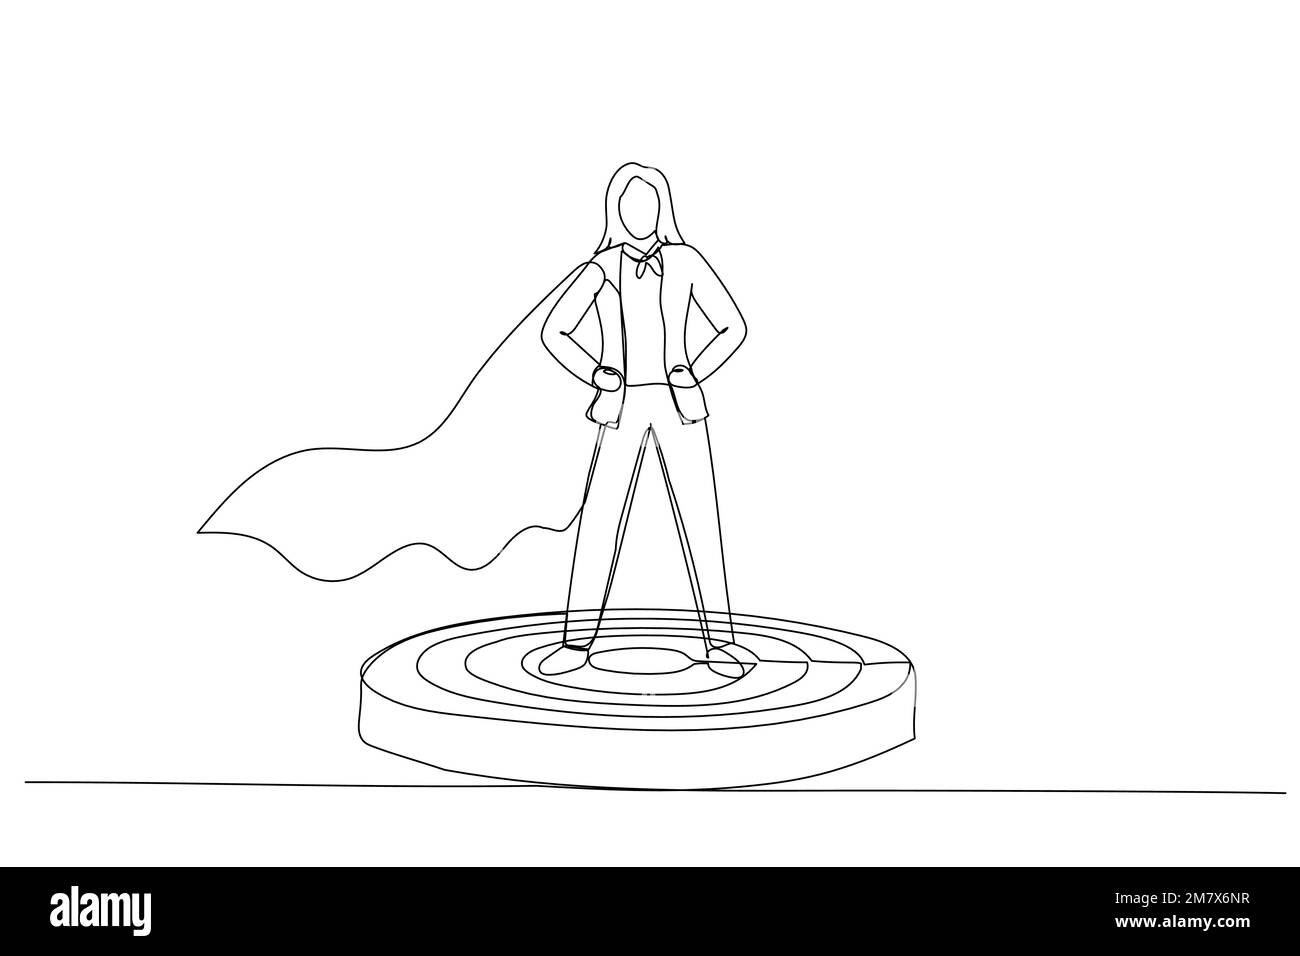 Illustration of businesswoman superhero leader on podium, standing proud and strong. Metaphor for business womanagement and boss. Single line art styl Stock Vector